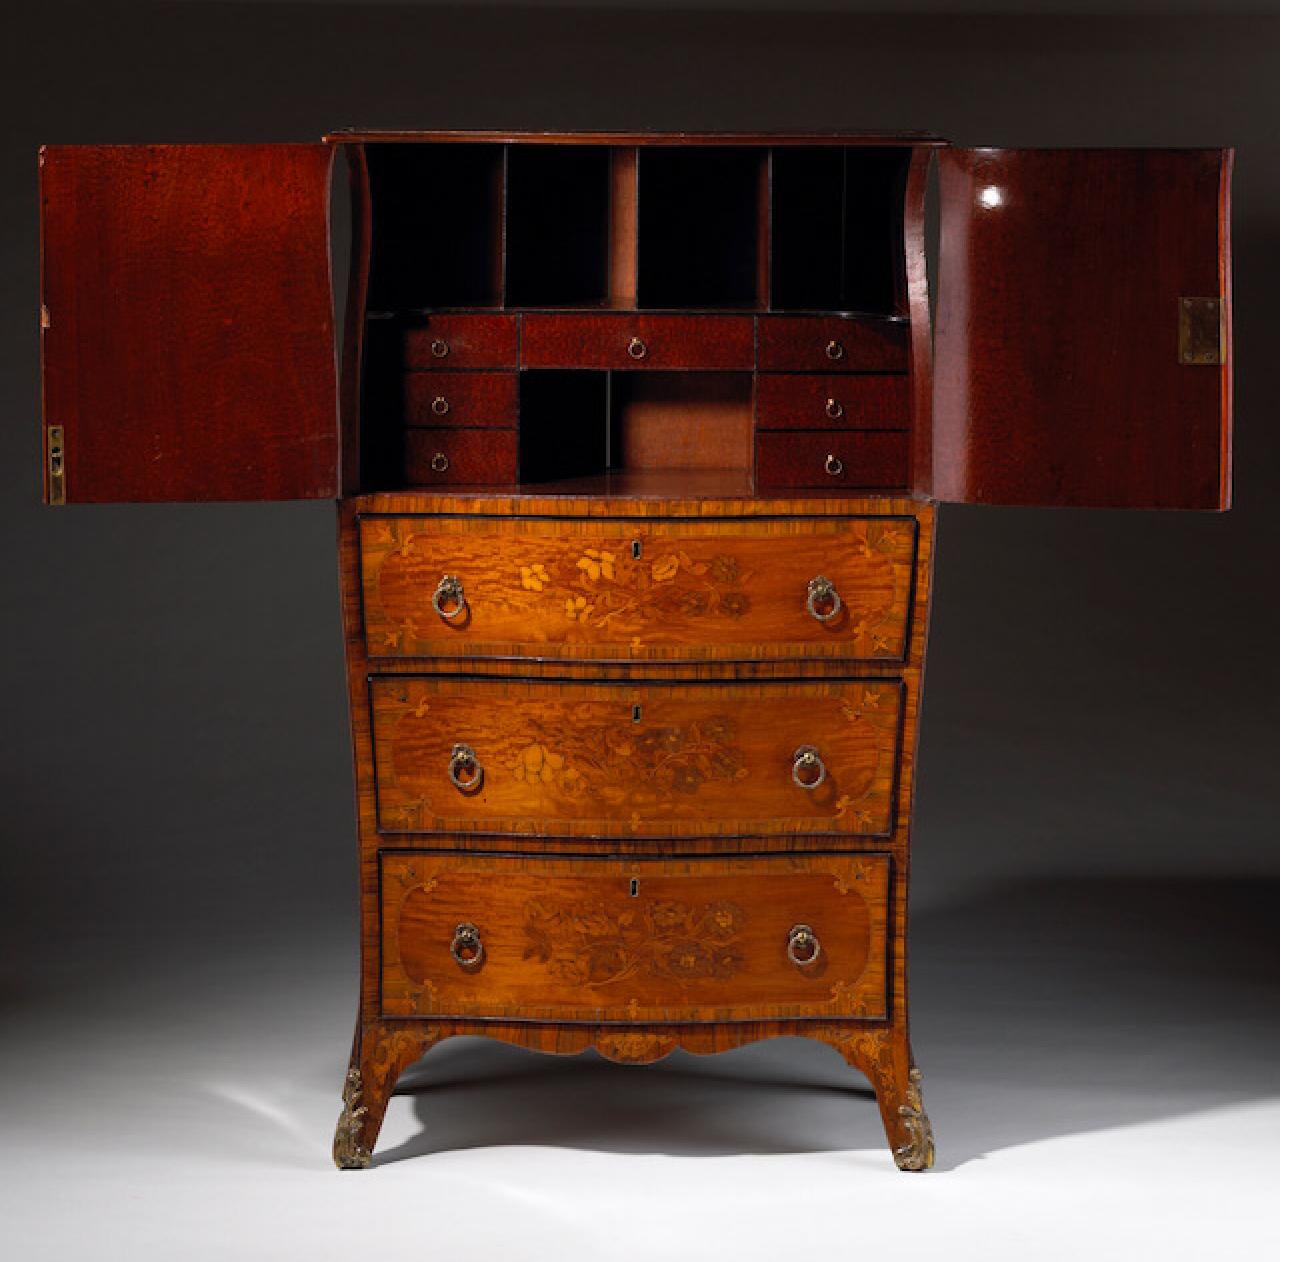 A charming George III yew wood, satinwood and floral marquetry bombe secretaire cabinet circa 1770 attributed to Ince and Mayhew. The shaped top has elegant eared corners above a pair of cupboard doors enclosing a neat writing surface and an